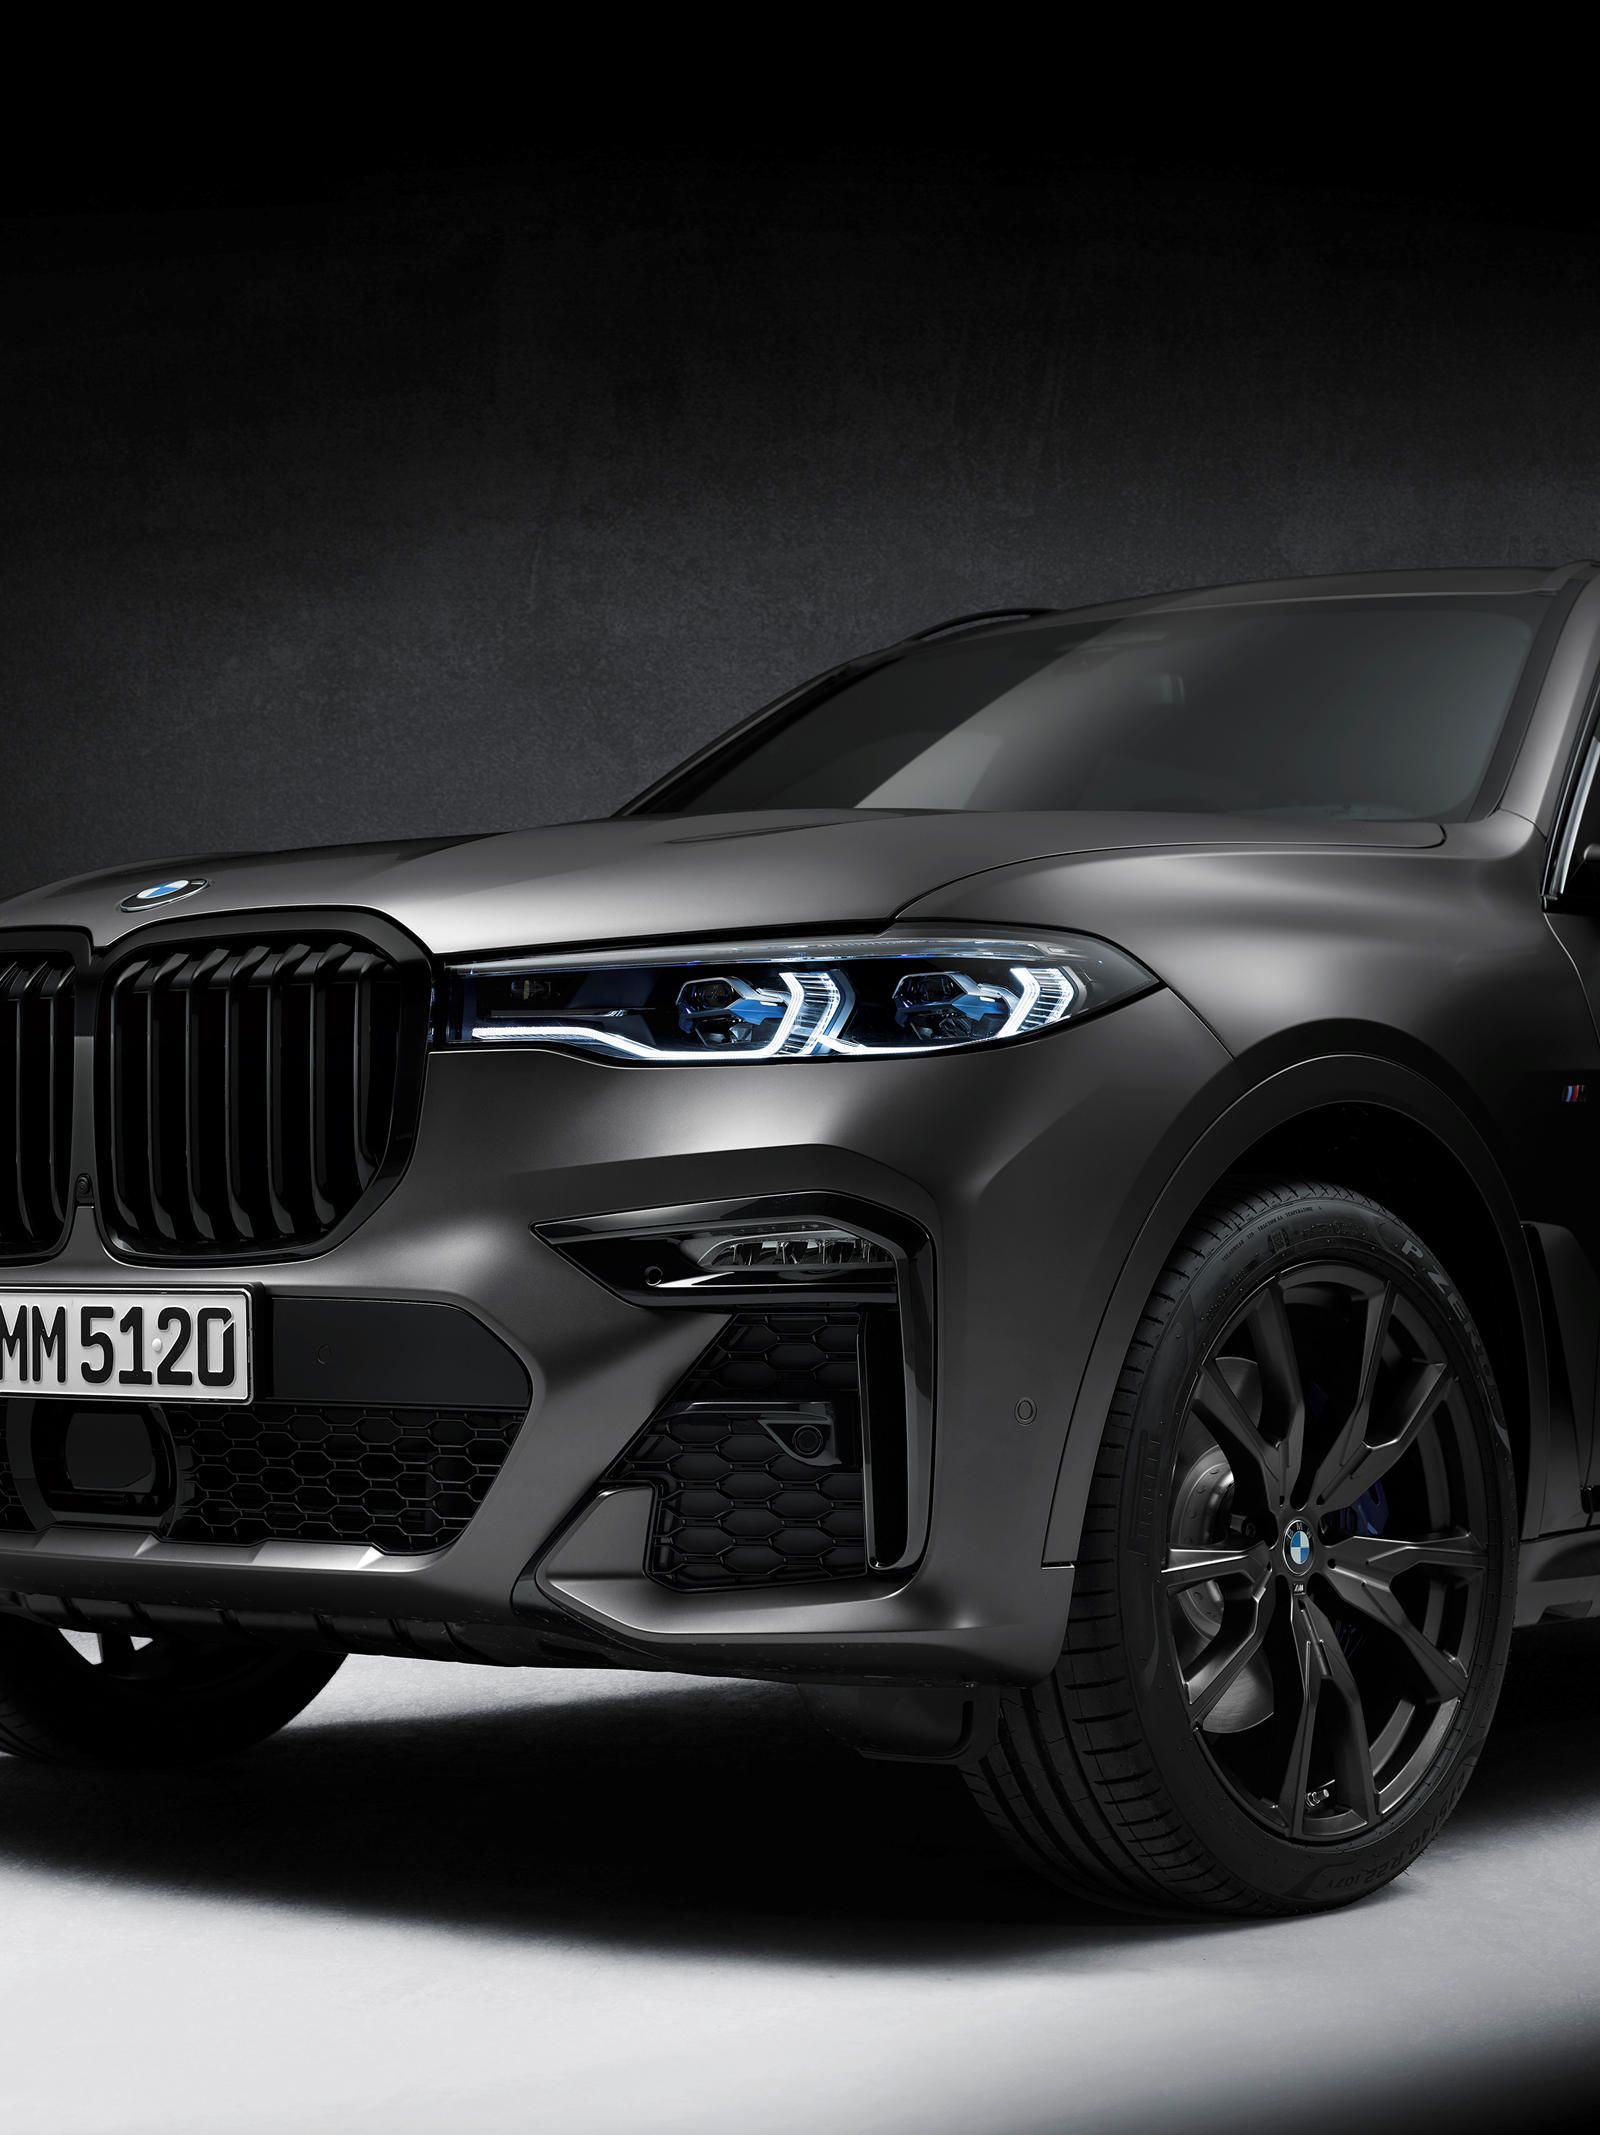 Say Hello To The 2021 BMW X7 Dark Shadow Edition. Only 600 will be built. Bmw x Bmw accessories, Bmw